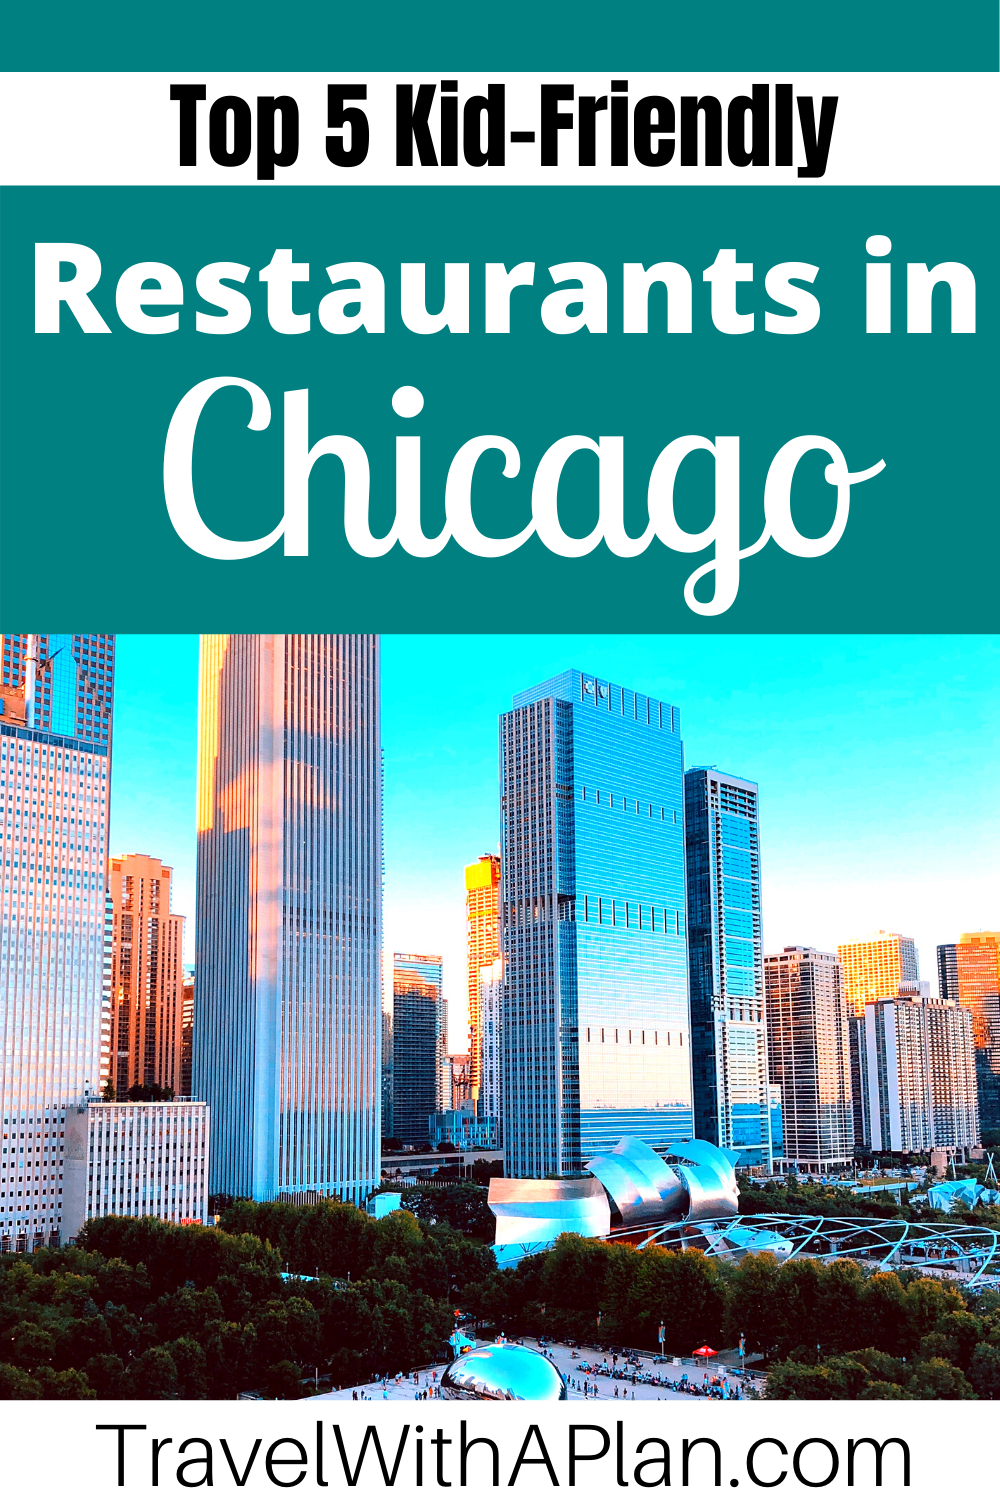 Top 5 Kid-Friendly Restaurants in Downtown Chicago | Travel With a Plan